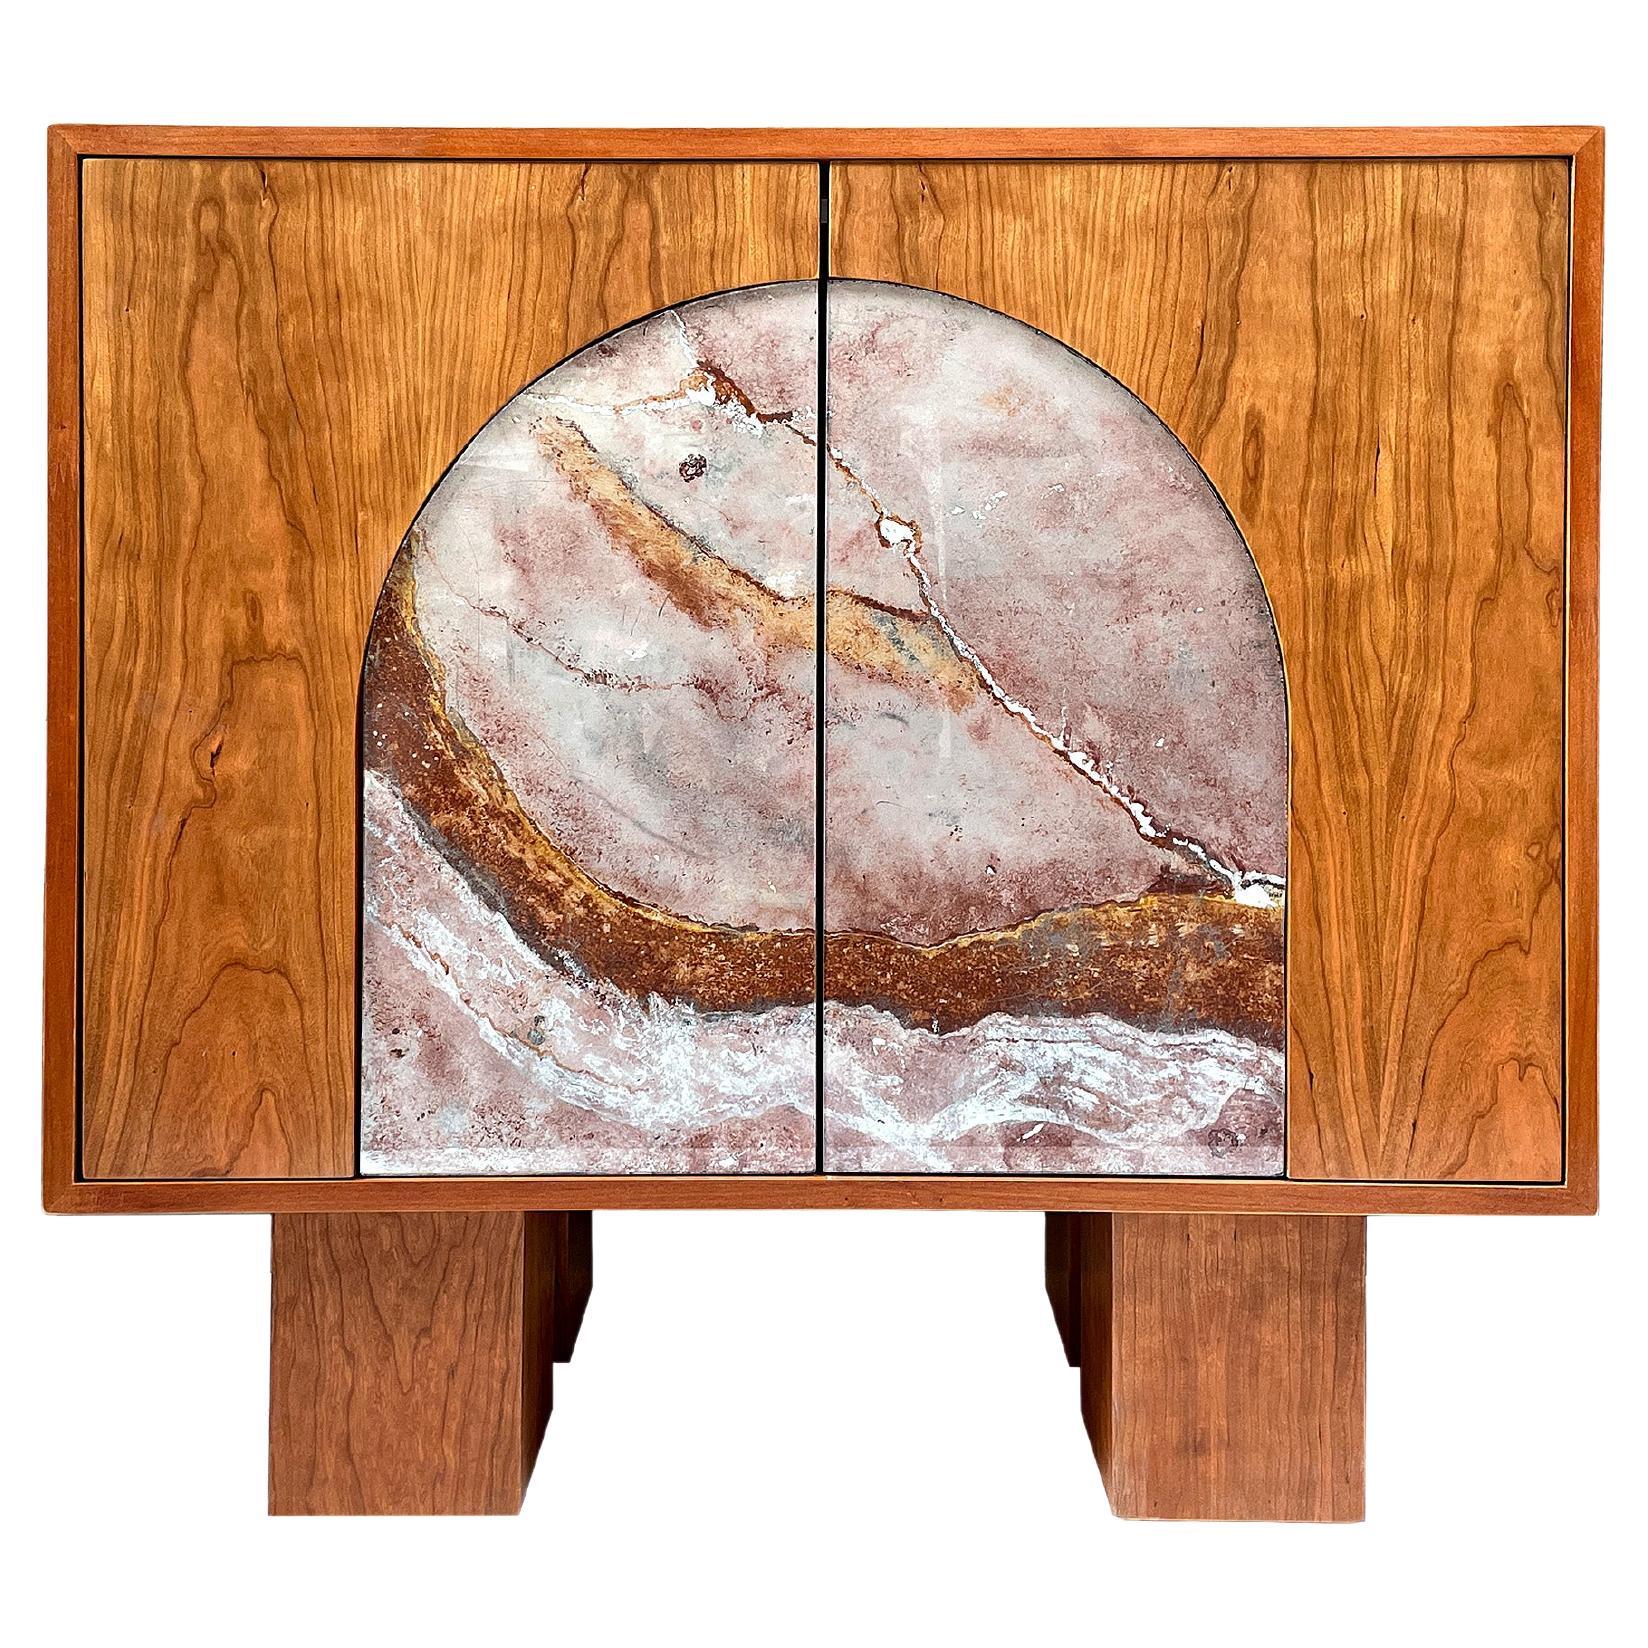 Modern 2-Door Sideboard, Cherry wood and Eglomize' Mirror by Ercole Home